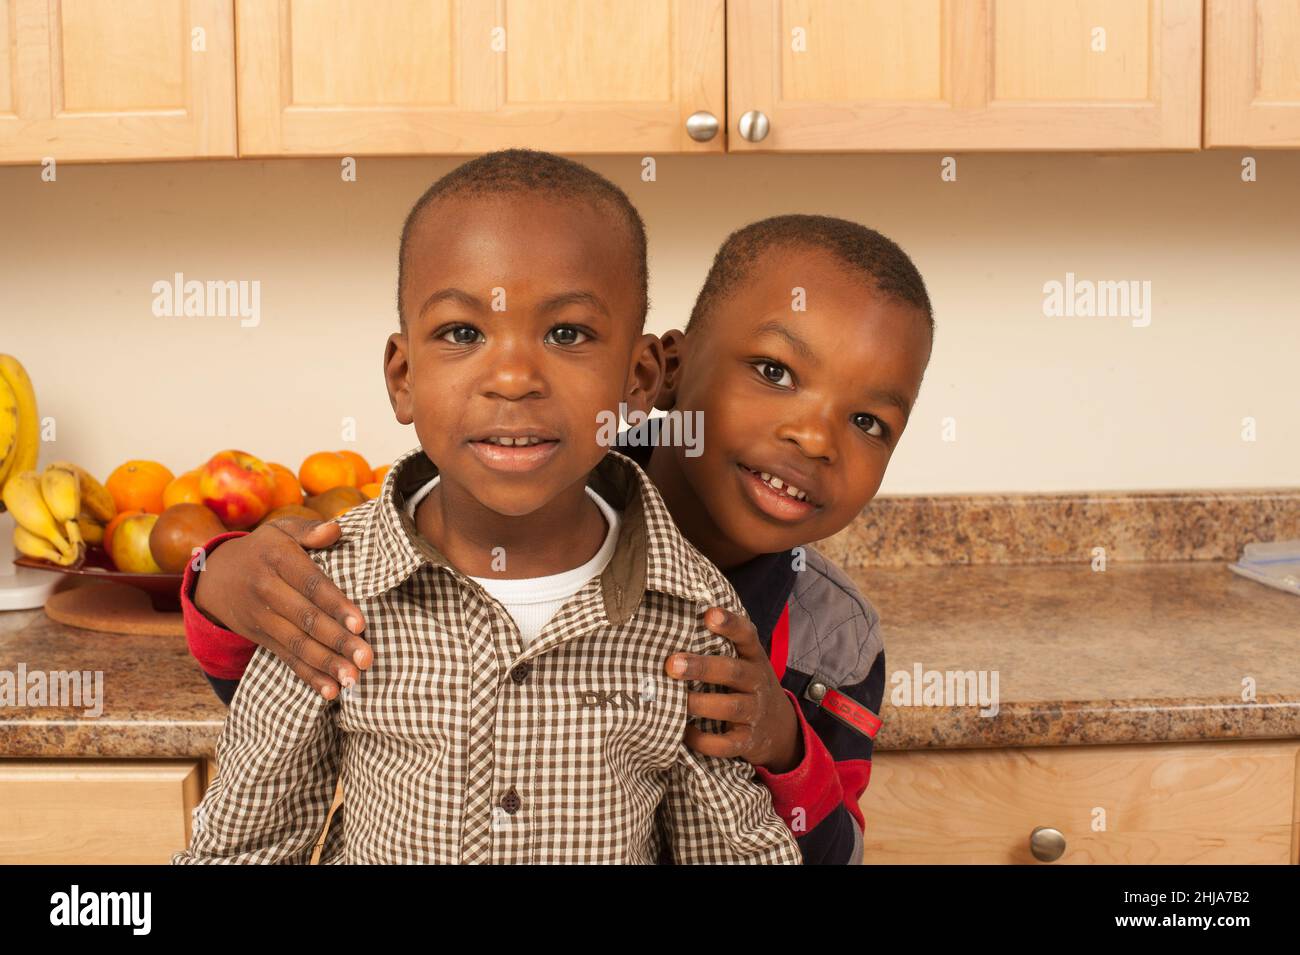 Brothers ages 2 and 4, portrait in kitchen, looking at camera Stock Photo